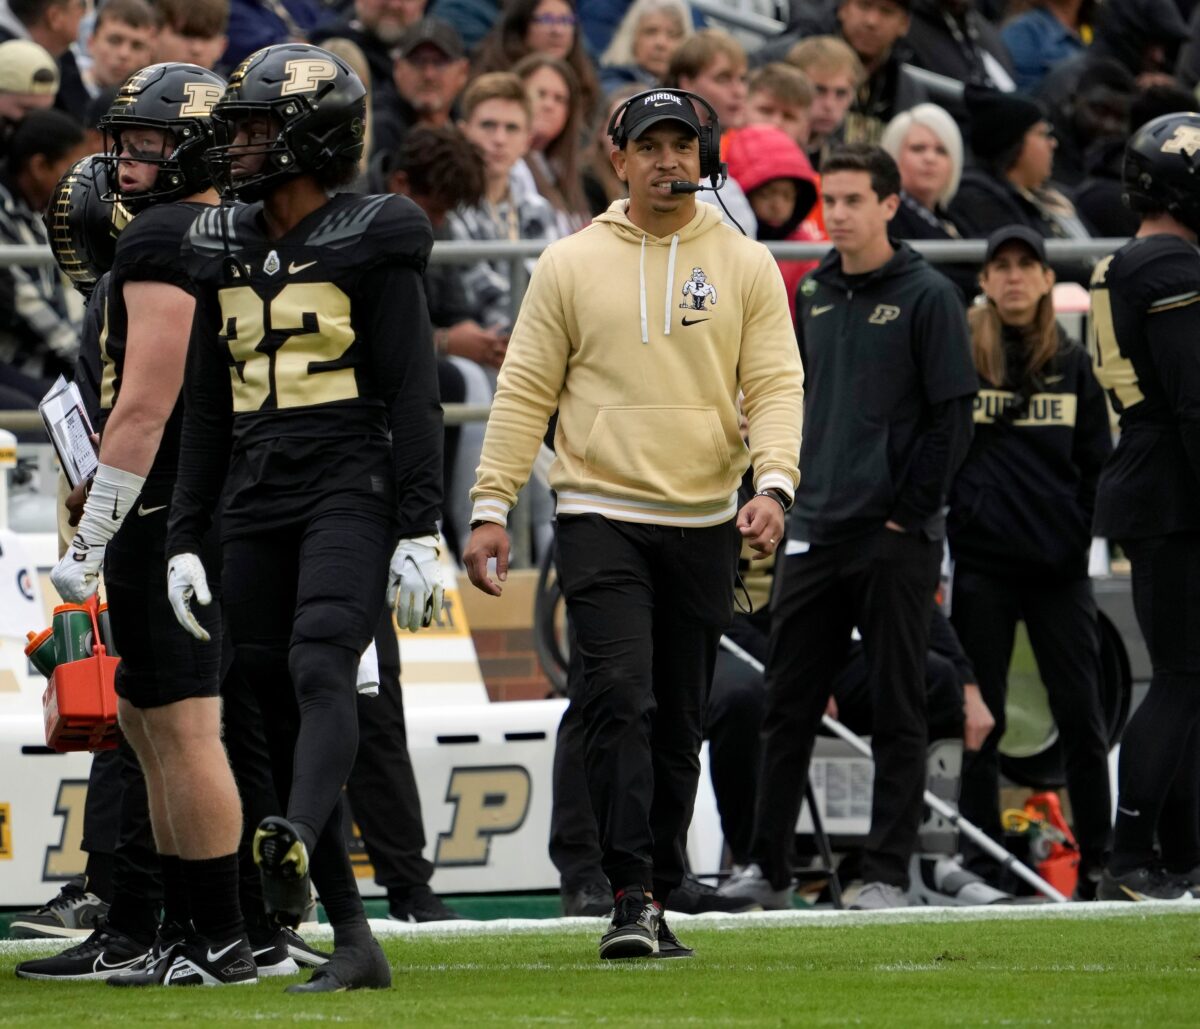 Previewing the Purdue Boilermakers ahead of Saturday’s game